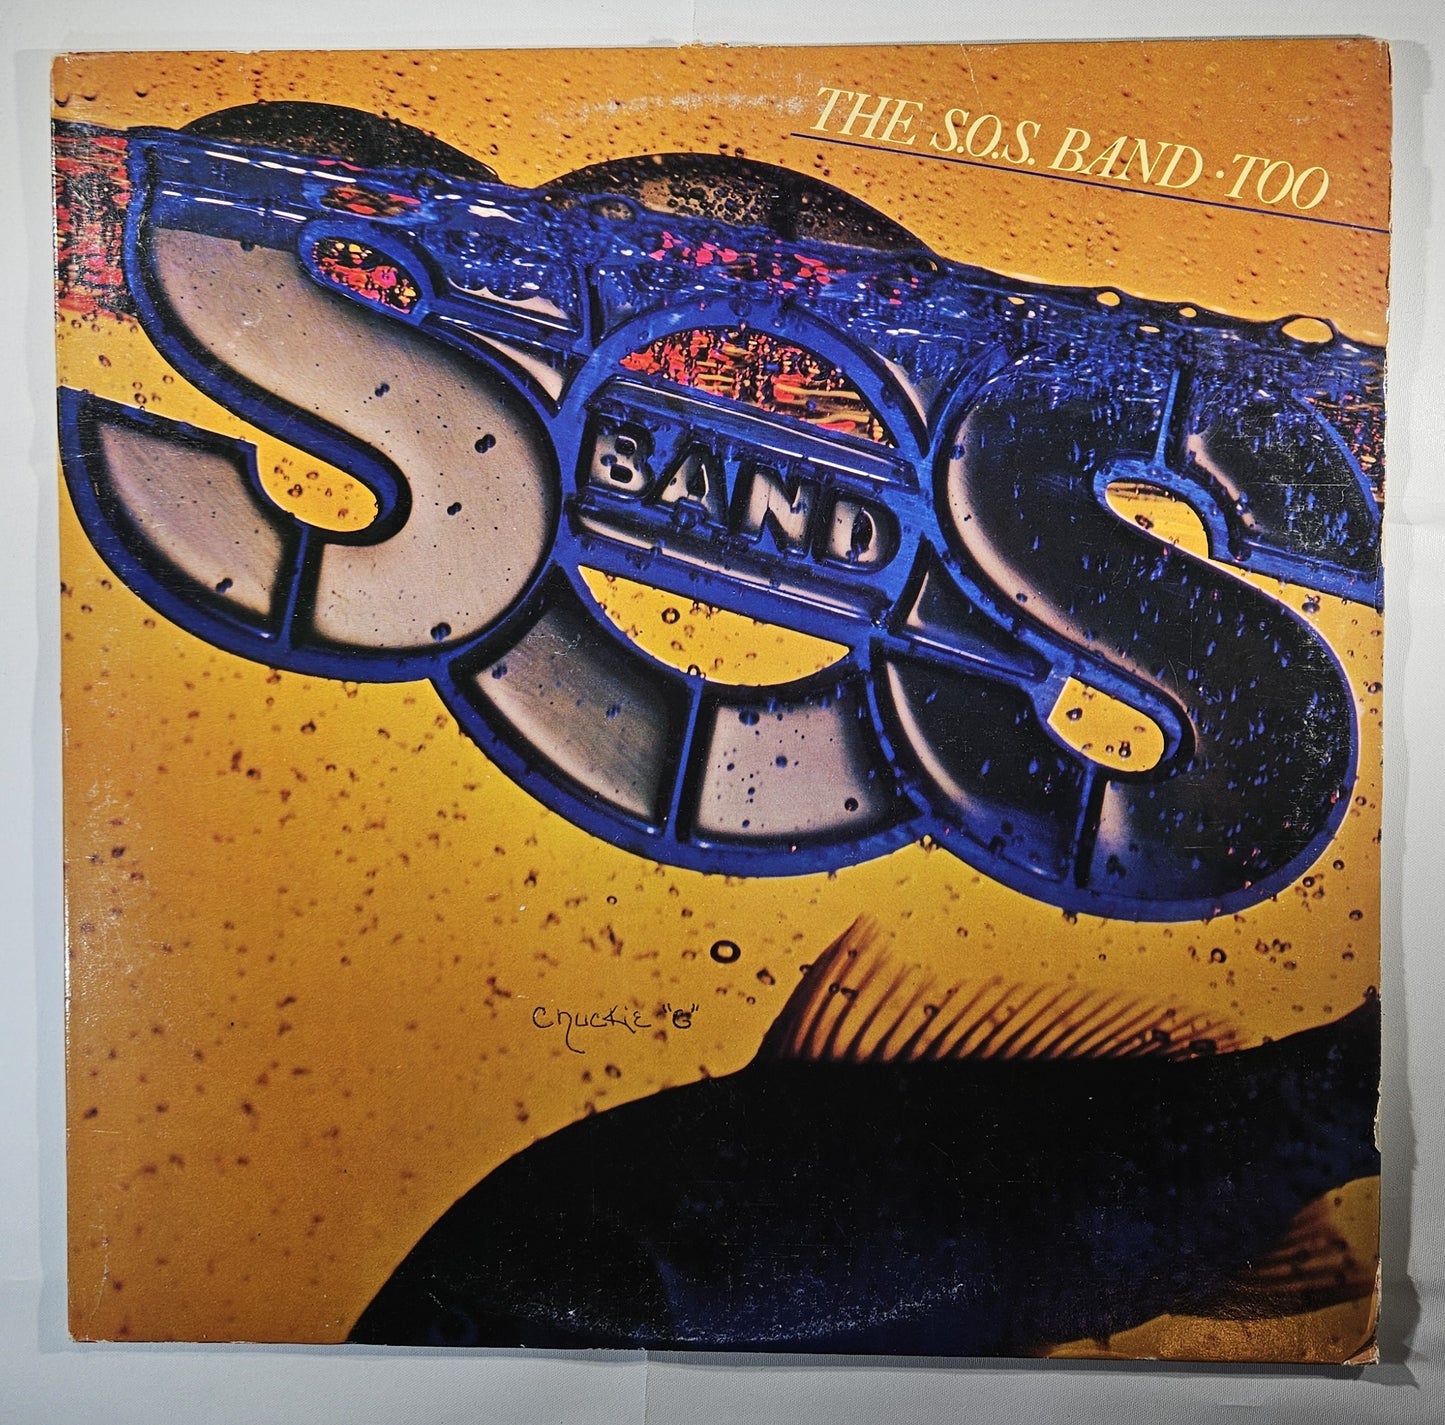 The S.O.S. Band - Too [1981 Used Vinyl Record LP]